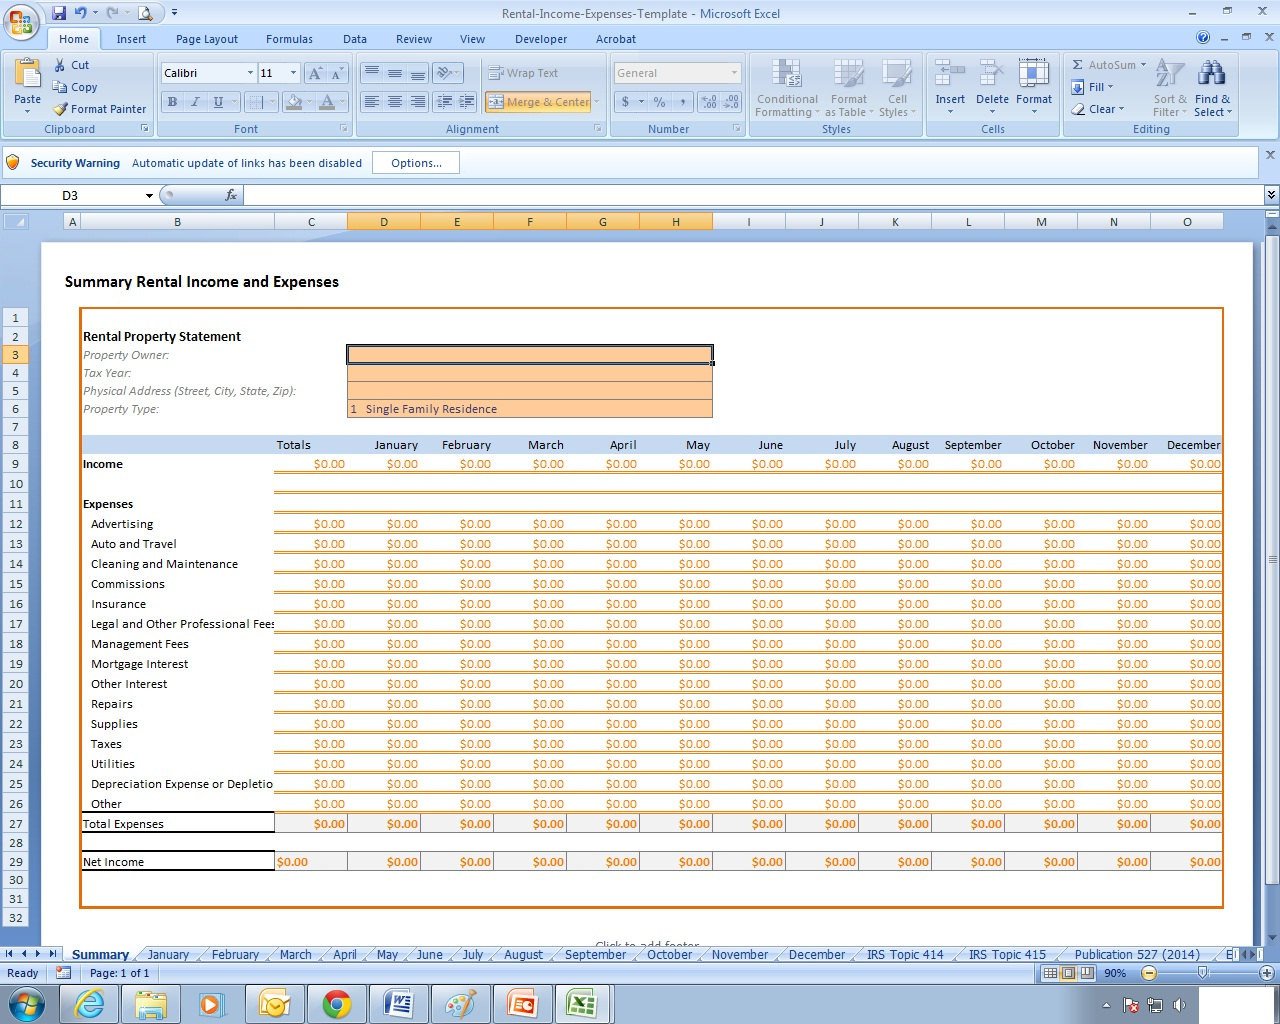 Rental Income Spreadsheet Template Rental In E and Expenses Excel Spreadsheet Template